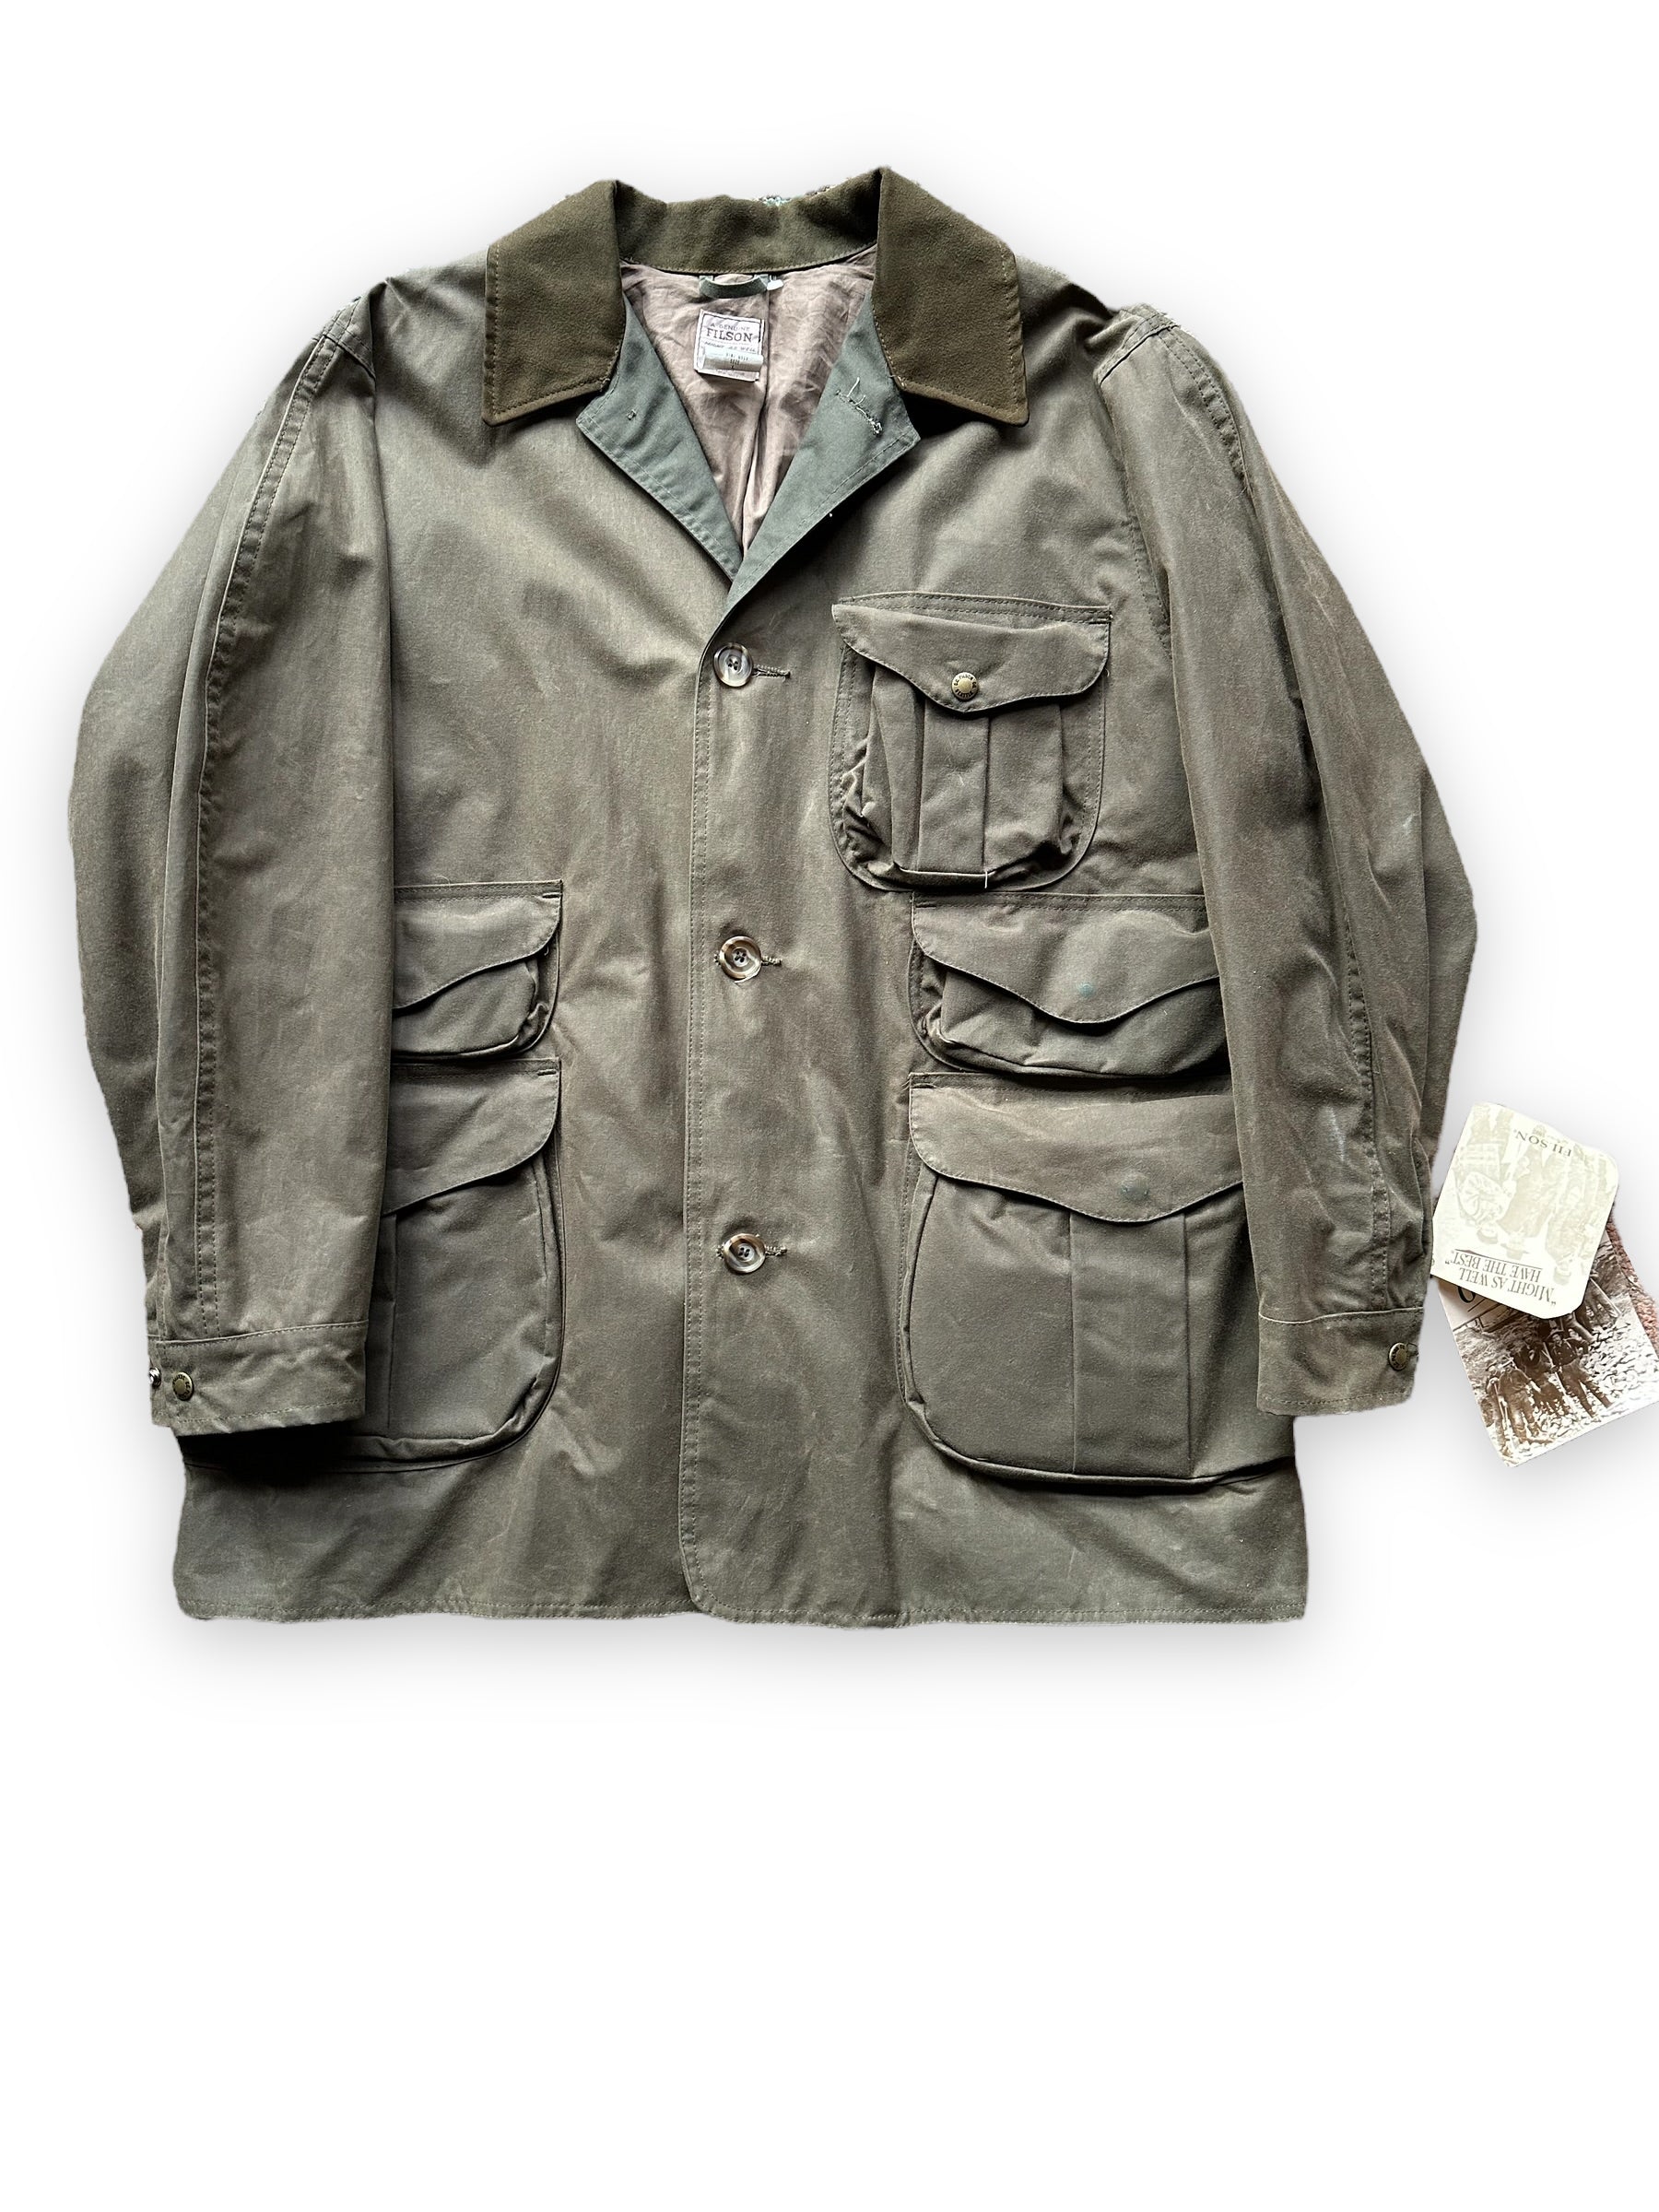 Filson Single Tin Chaps Reviewed: 37 Years in the Field